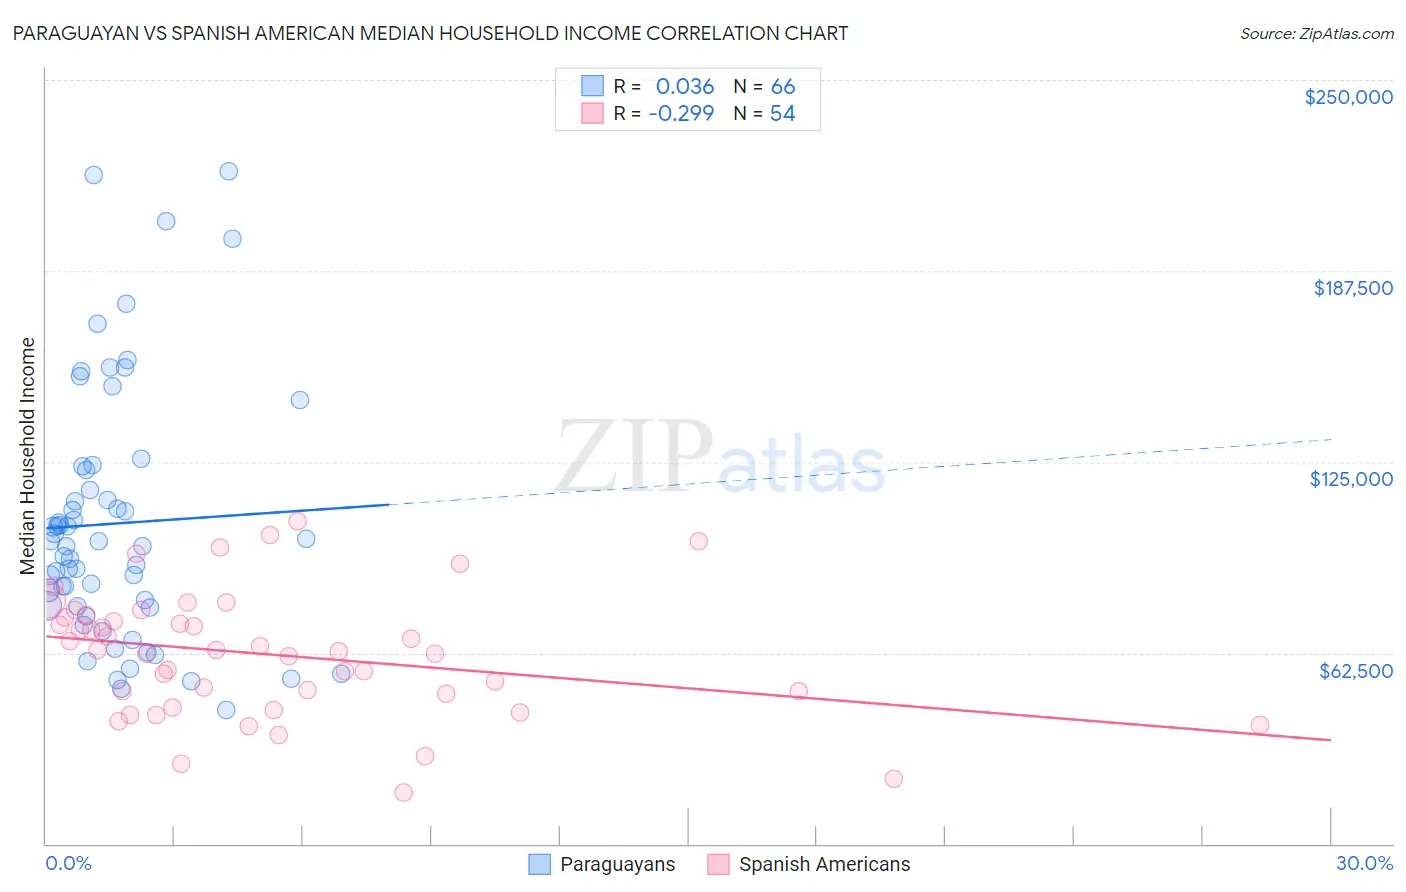 Paraguayan vs Spanish American Median Household Income